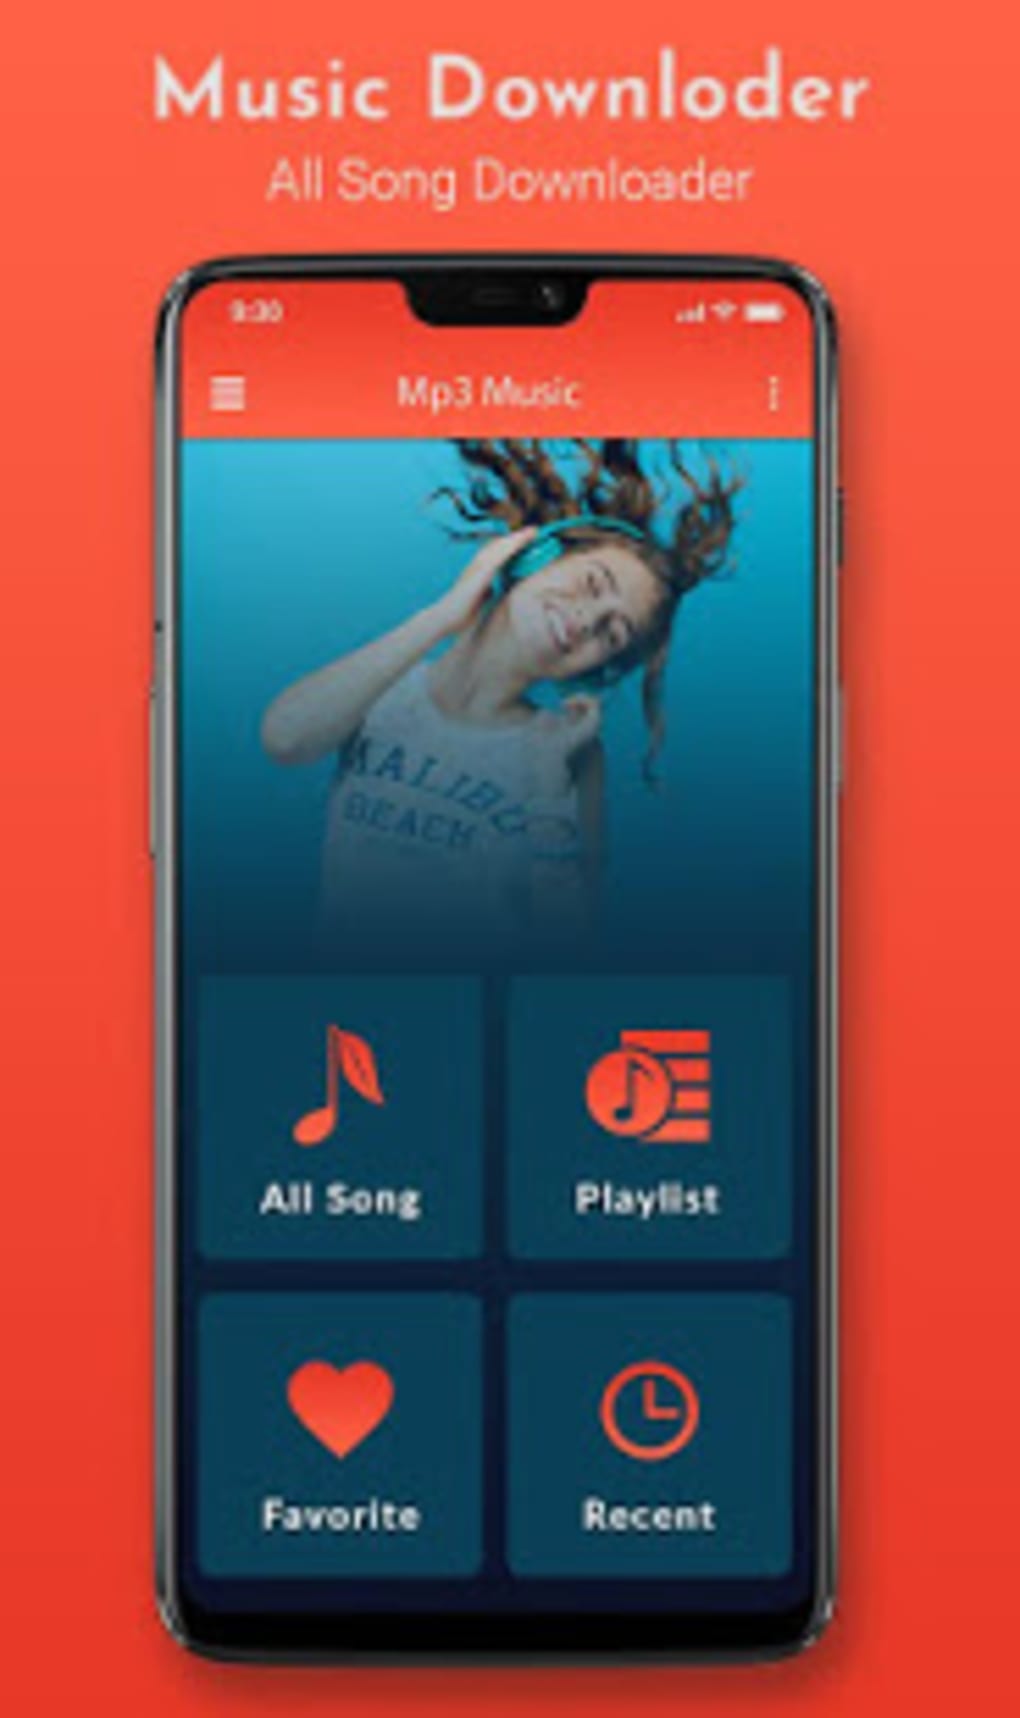 Free Bollywood Songs Downloader App For Android